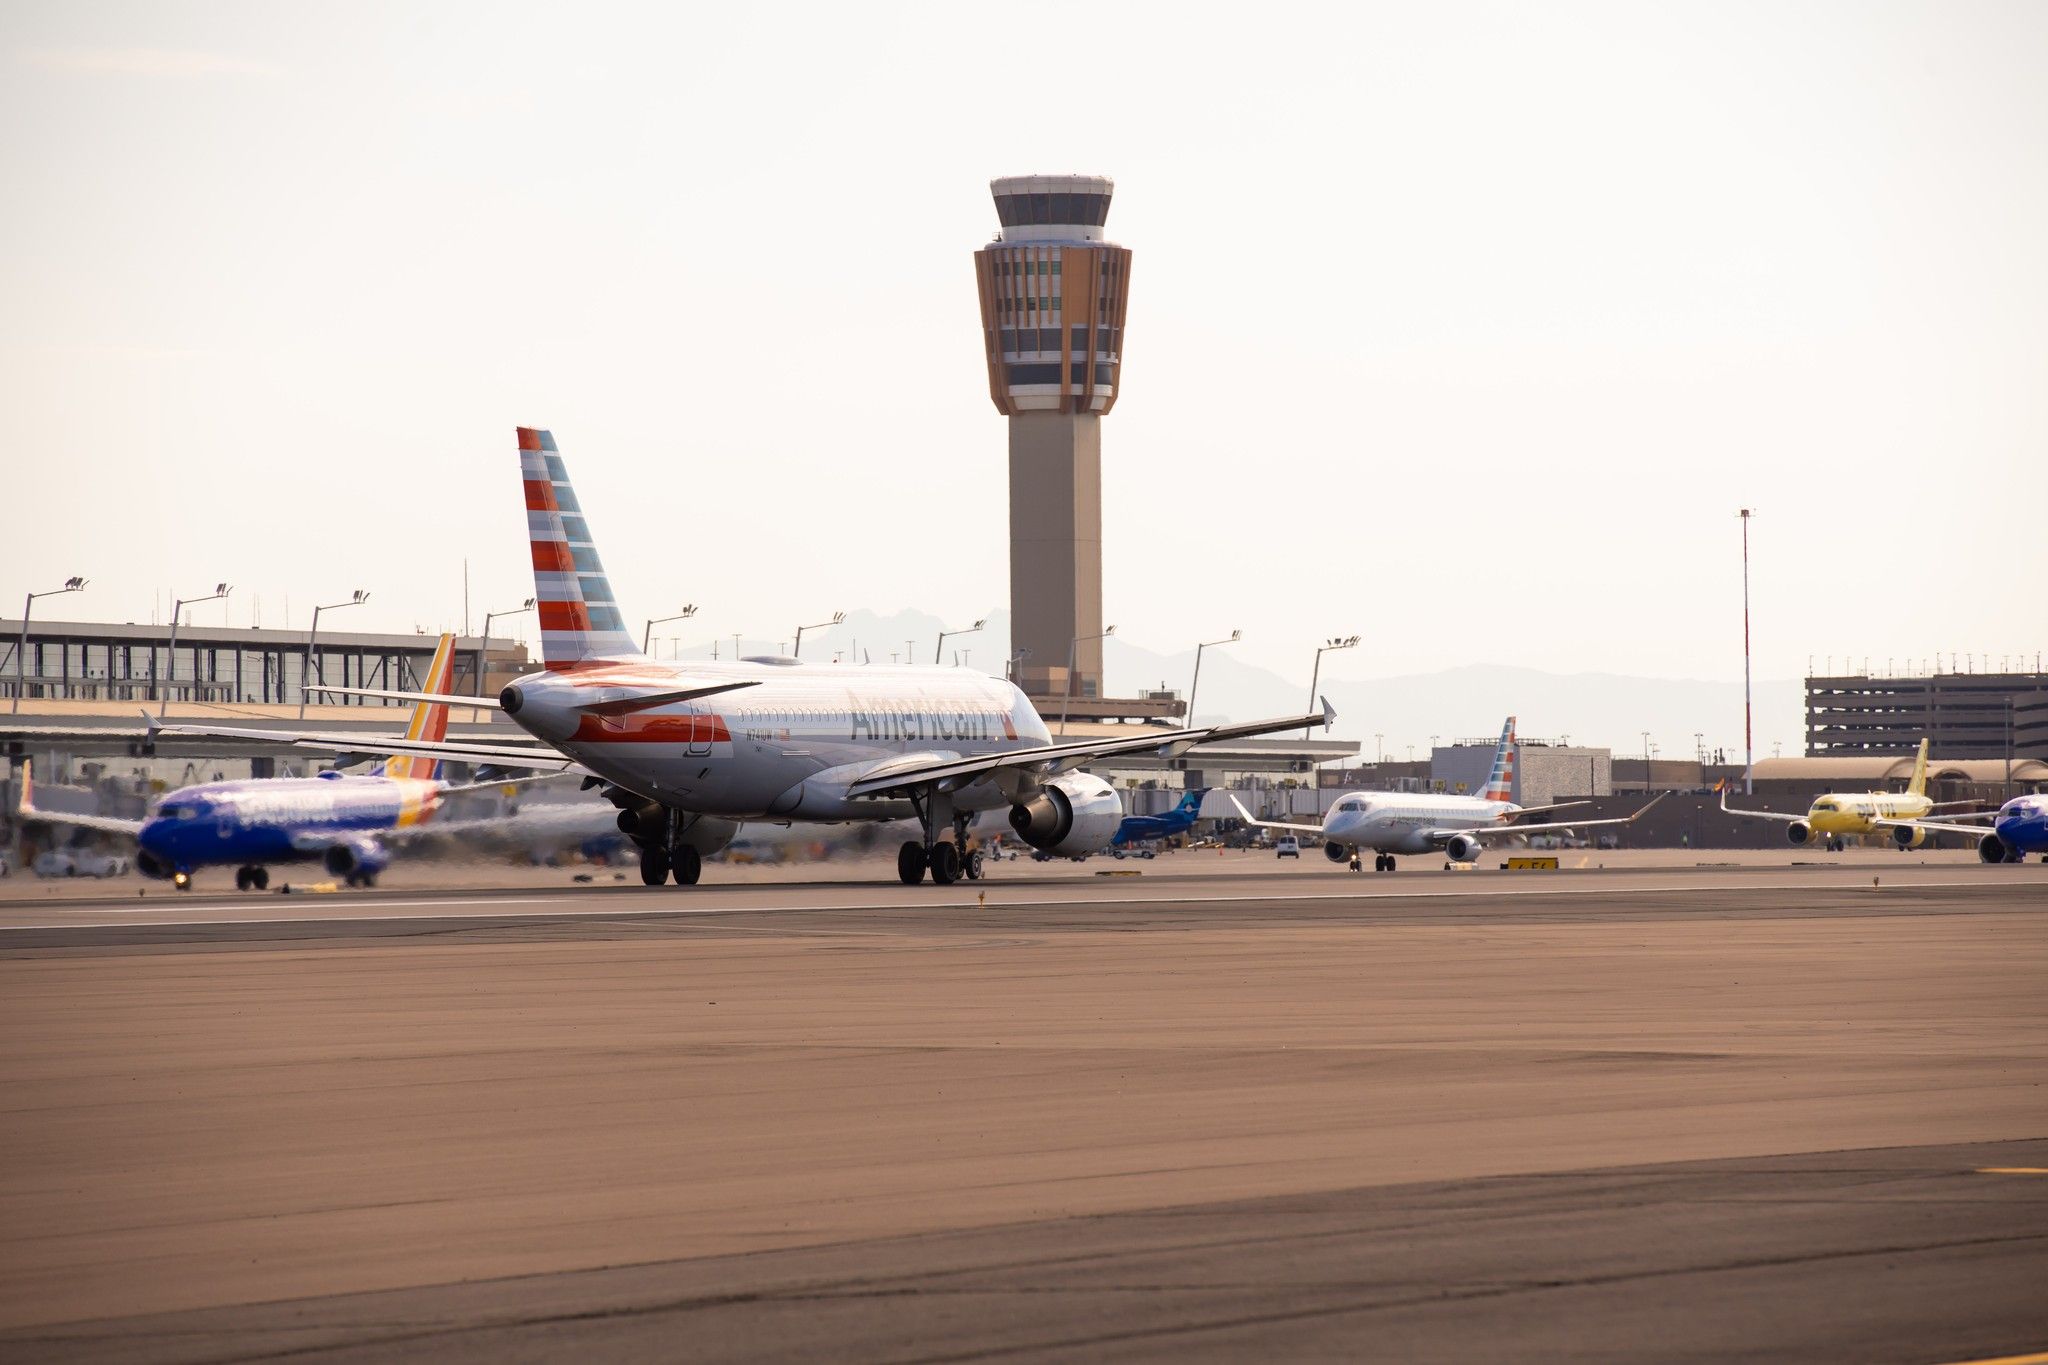 American Airlines Airbus A319 at Phoenix Sky Harbor International Airport.